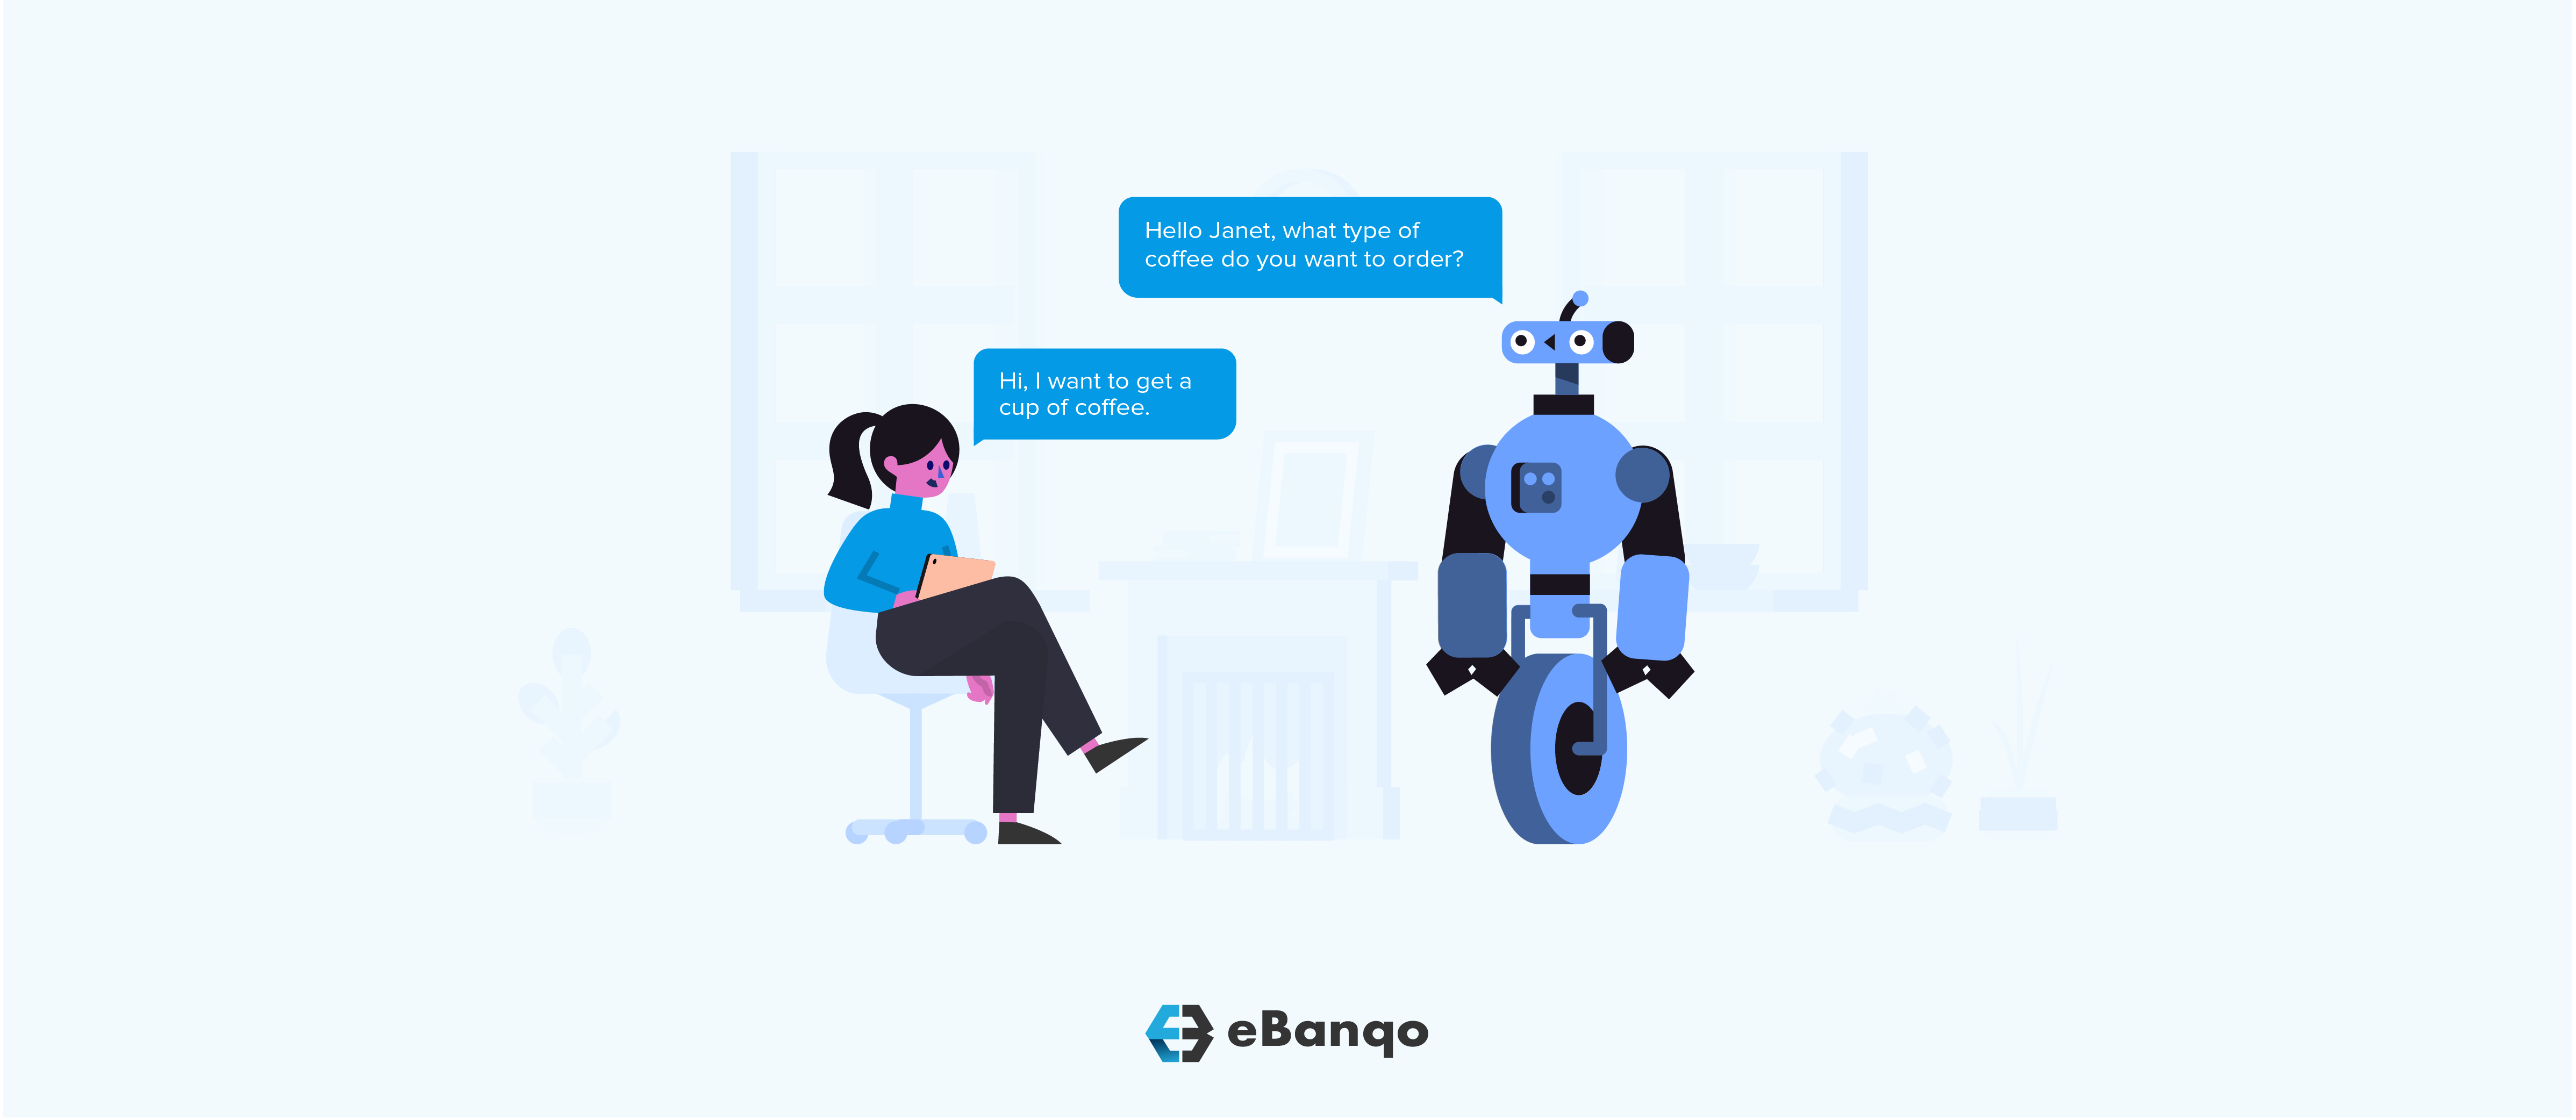 conversational ai chatbot or rule-based chatbot